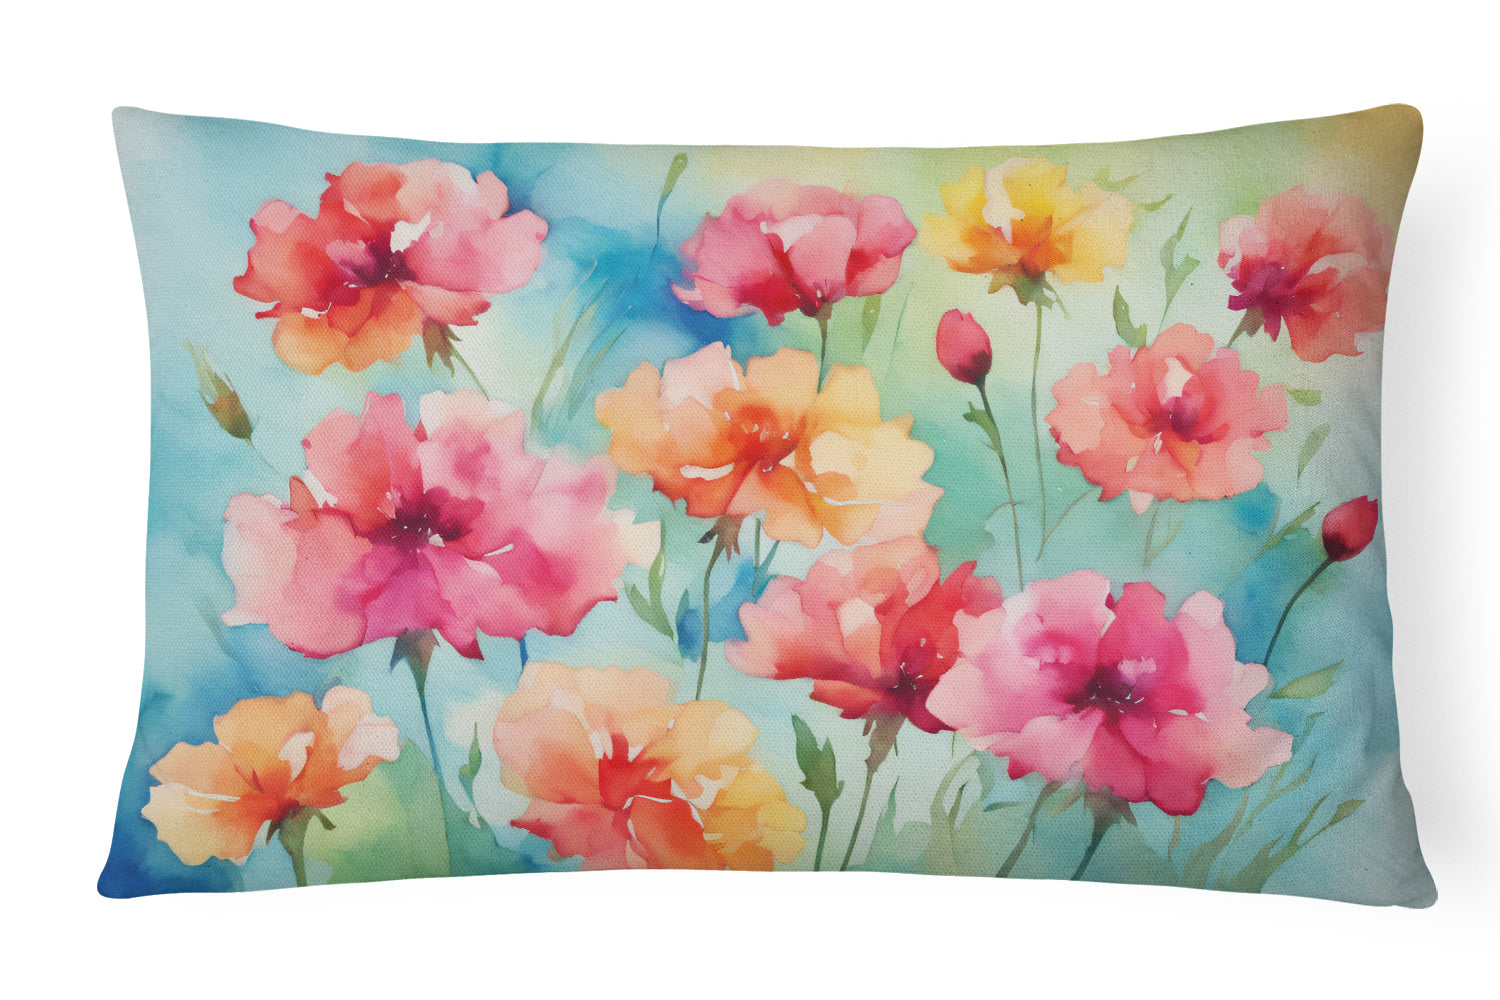 Buy this Carnations in Watercolor Fabric Decorative Pillow